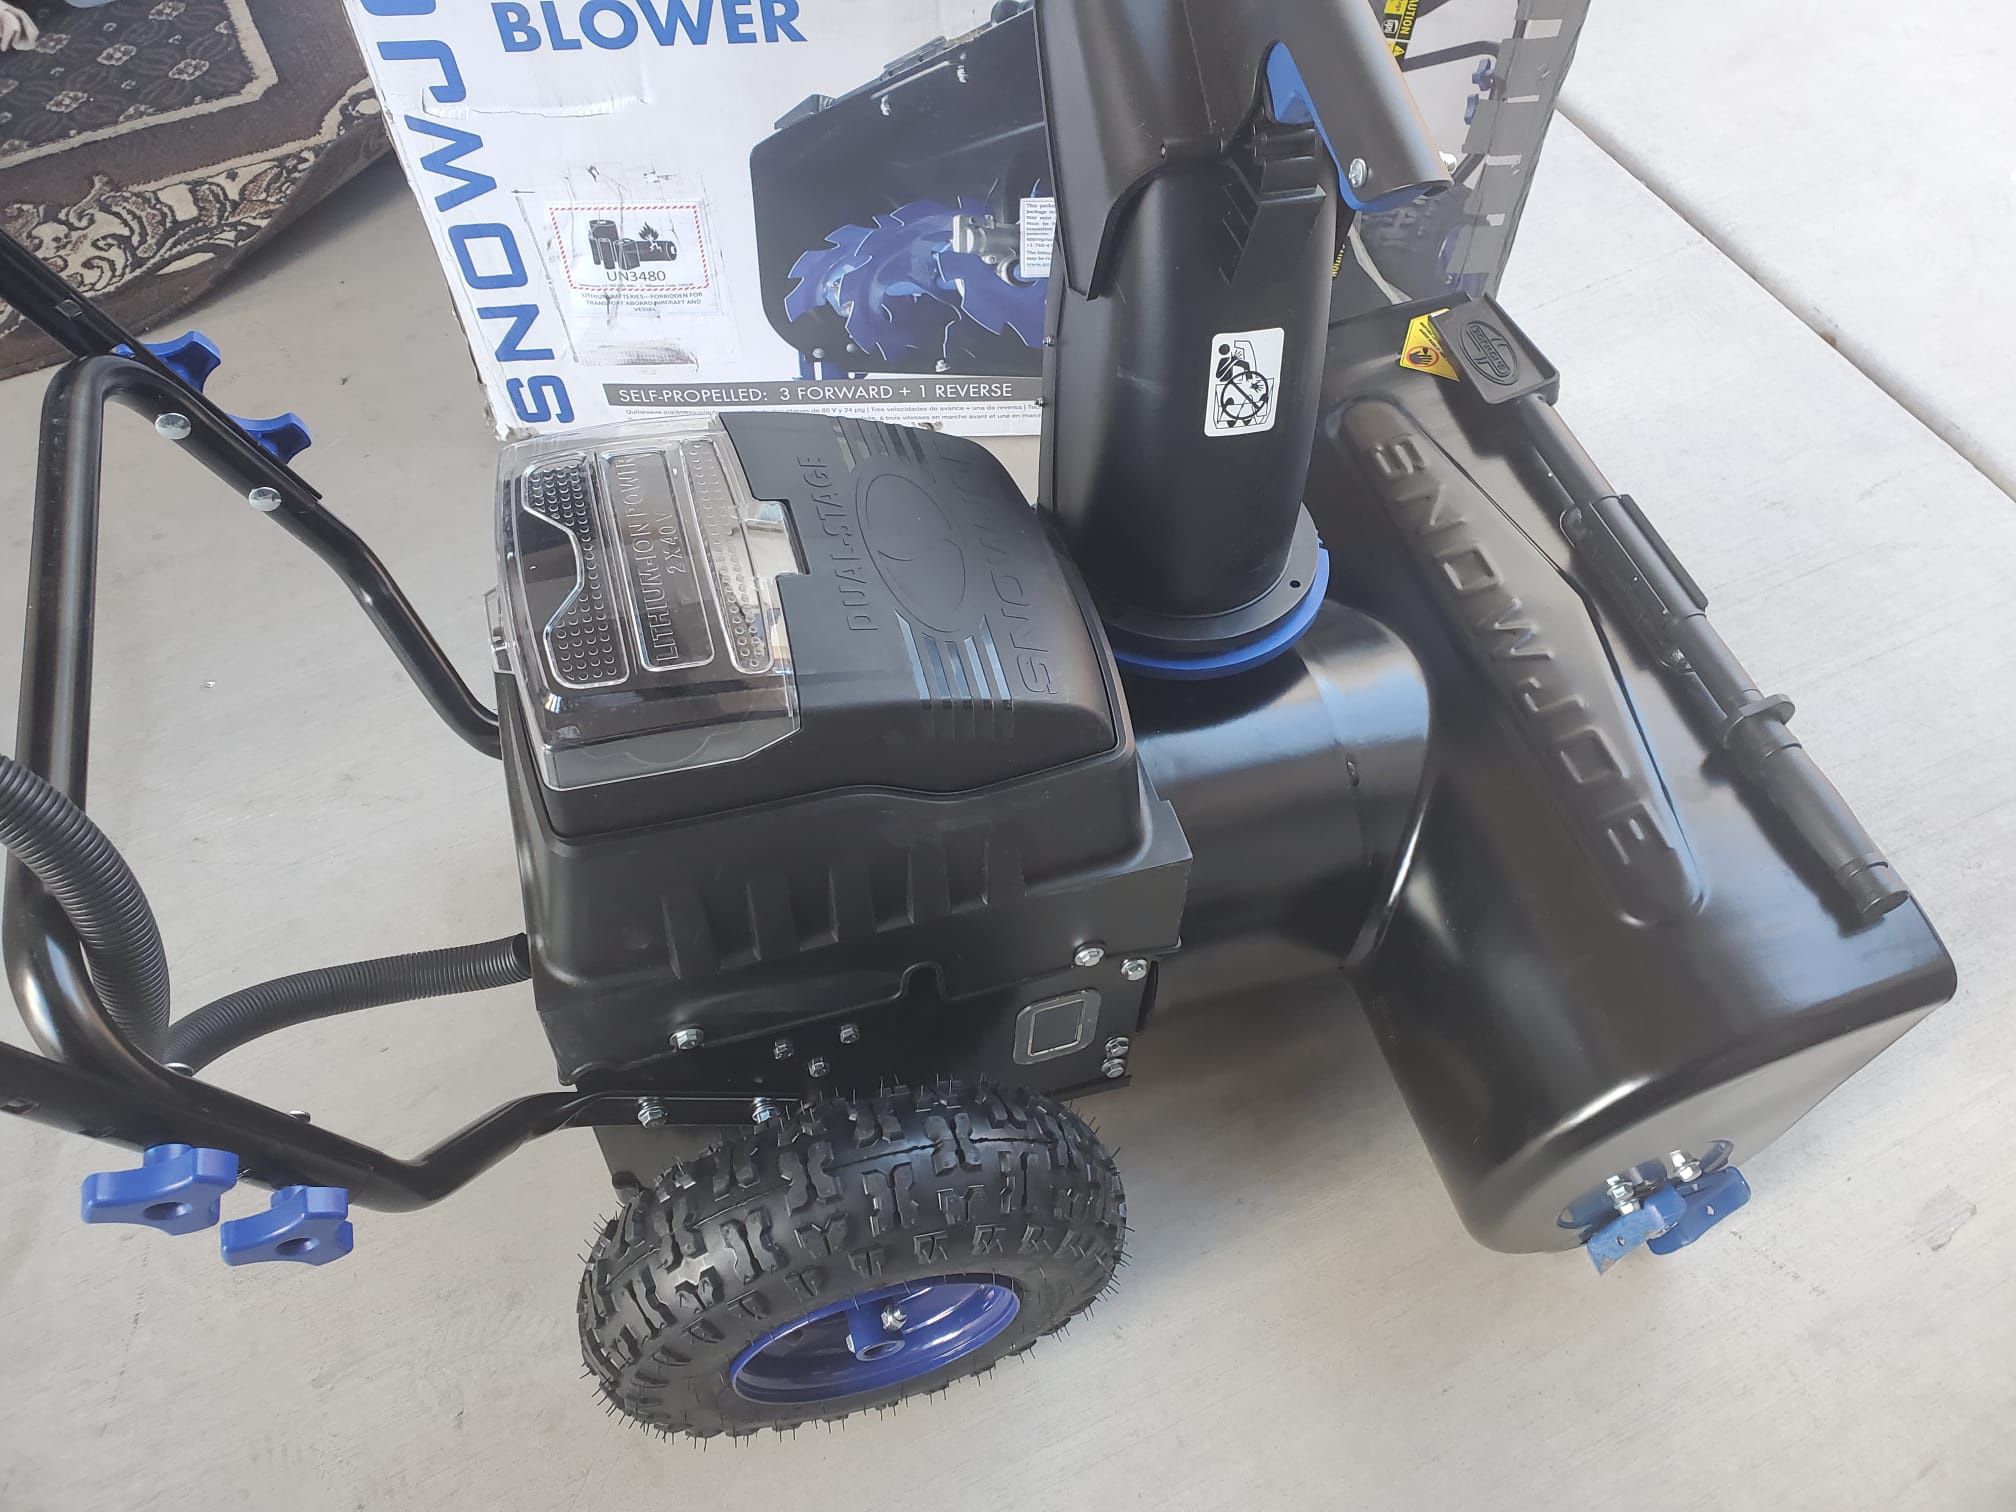 SnowJoe Blower 80-Volt iONPRO 24 in. Cordless Dual-Stage Snow Blower with 2 x 5.0 Ah Batteries and Charger